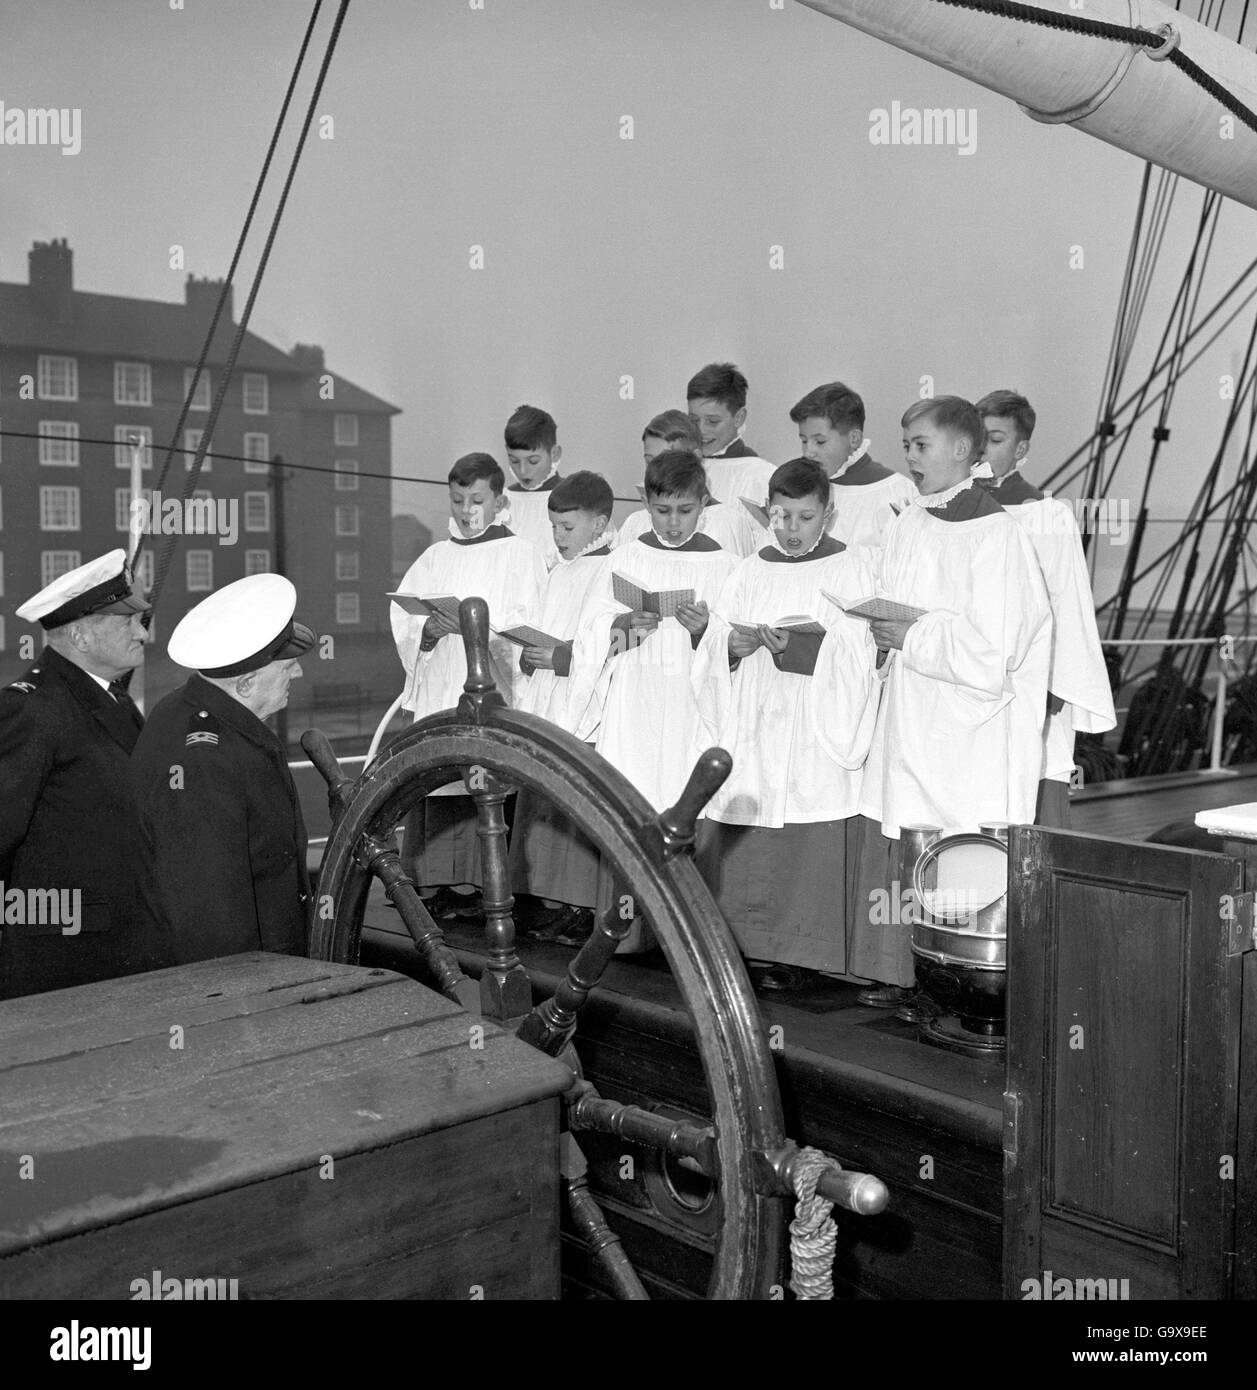 Choirboys from Vanbrugh Castle, the RAF Benevolent Fund's orphanage at Blackheath, London, blend Christmas tradition with maritime history as they sing carols on the deck of the Cutty Sark, last of Britain's great clipper ships, at Greenwich. Listening by the ship's wheel is Lieutenant-Commander H.J. West, RNR (right), Chief Officer of the Cutty Sark. Stock Photo